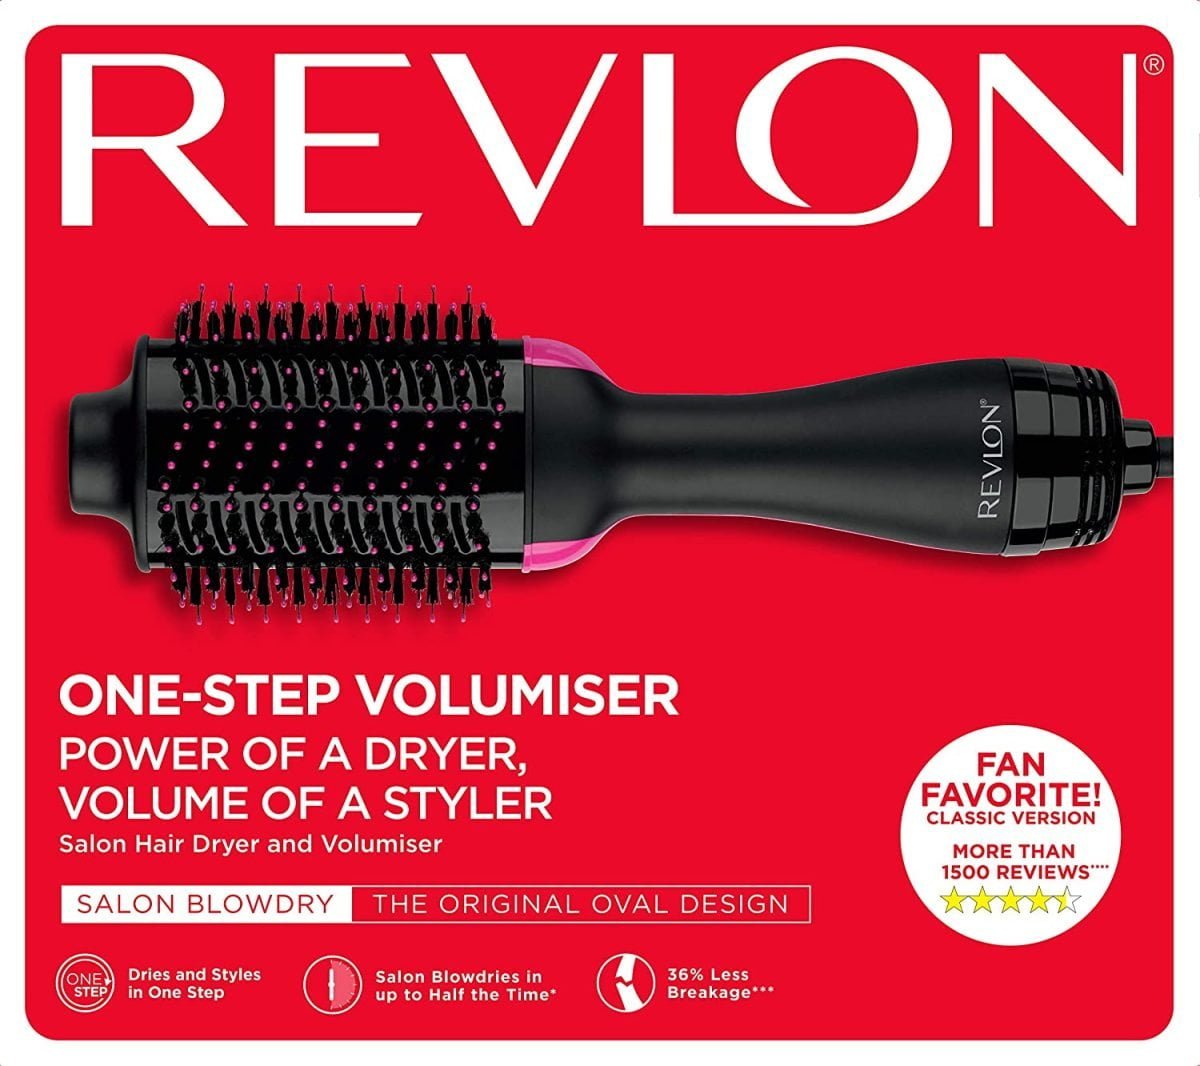 81Agocsl7L. Ac Sl1500 Revlon The Revlon One-Step Hair Dryer And Volumizer Is A Designed Hot Air Brush To Deliver Gorgeous Volume And Brilliant Shine In A Single Step. The Unique Oval Brush Design Smooth Hair While The Rounded Edges Quickly Create Volume At The Root And Beautifully Full-Bodied Curls At The Ends In A Single Pass, For Salon Blowouts At Home. &Lt;Ul&Gt; &Lt;Li&Gt;&Lt;Span Class=&Quot;A-List-Item&Quot;&Gt;A 2-In-1 Styling Tool That Gives The Power Of A Dryer And A Volume Of A Styler&Lt;/Span&Gt;&Lt;/Li&Gt; &Lt;Li&Gt;&Lt;Span Class=&Quot;A-List-Item&Quot;&Gt;Glides Through Your Hair To Detangle, Dry And Volumize In Half The Time. &Lt;/Span&Gt;&Lt;/Li&Gt; &Lt;Li&Gt;&Lt;Span Class=&Quot;A-List-Item&Quot;&Gt;The Oval Brush Creates Volume At Roots And Curled Ends&Lt;/Span&Gt;&Lt;/Li&Gt; &Lt;Li&Gt;&Lt;Span Class=&Quot;A-List-Item&Quot;&Gt;Boosted By Ionic Technology, Hair Dries Faster With Less Damage&Lt;/Span&Gt;&Lt;/Li&Gt; &Lt;Li&Gt;&Lt;Span Class=&Quot;A-List-Item&Quot;&Gt;2 Heat Settings Plus Cool Setting&Lt;/Span&Gt;&Lt;/Li&Gt; &Lt;Li&Gt;&Lt;Span Class=&Quot;A-List-Item&Quot;&Gt;Barrel Size Is 2 Inches | 1-Year Warranty | 220V - 240V&Lt;/Span&Gt;&Lt;/Li&Gt; &Lt;/Ul&Gt; Revlon Revlon Salon One-Step Hair Dryer And Volumizer Rvdr5222